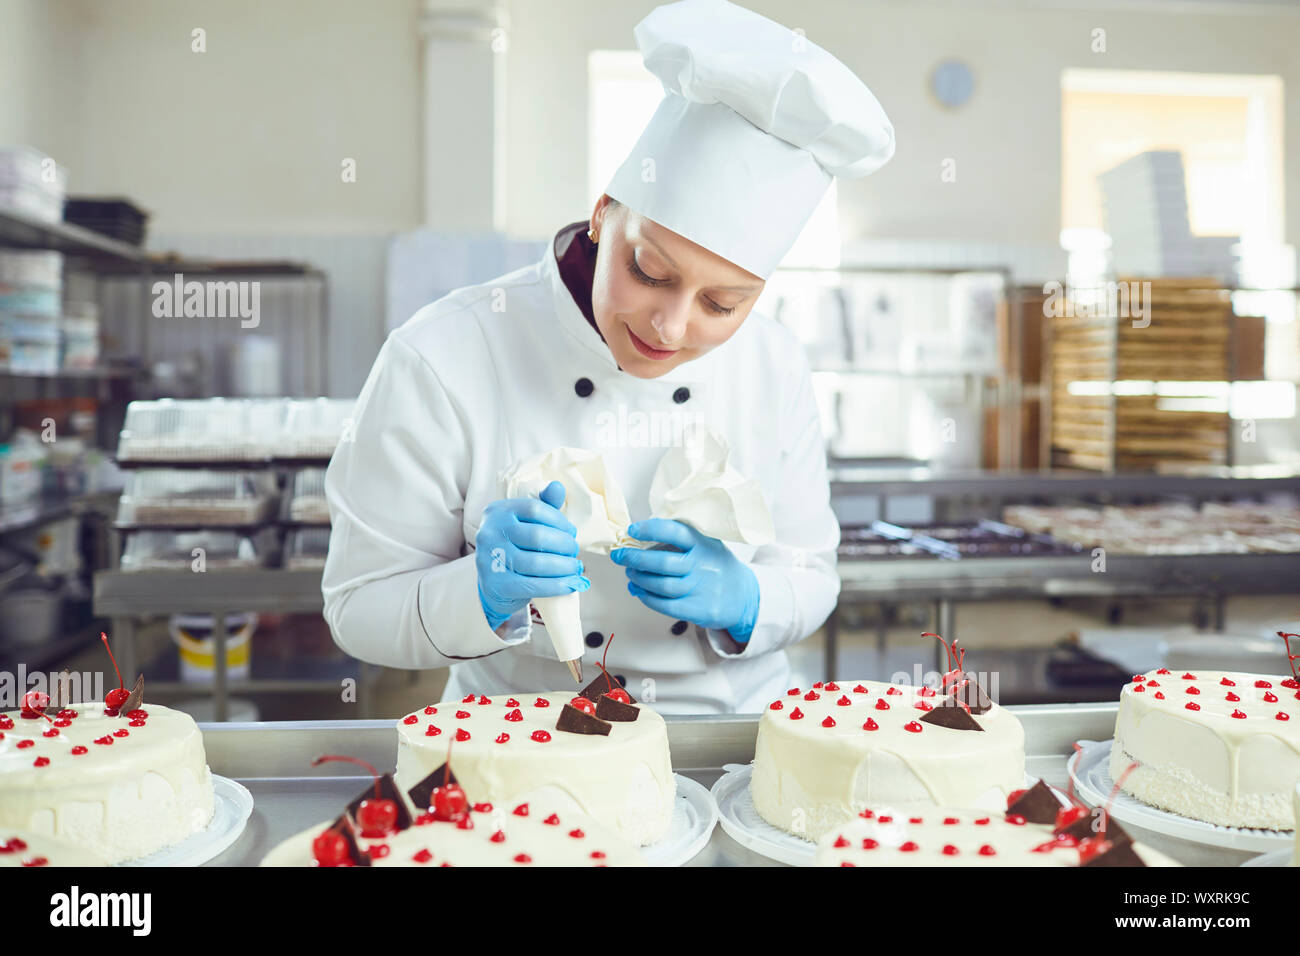 Confectioner with pastry cake in his hand at the bakery. Stock Photo